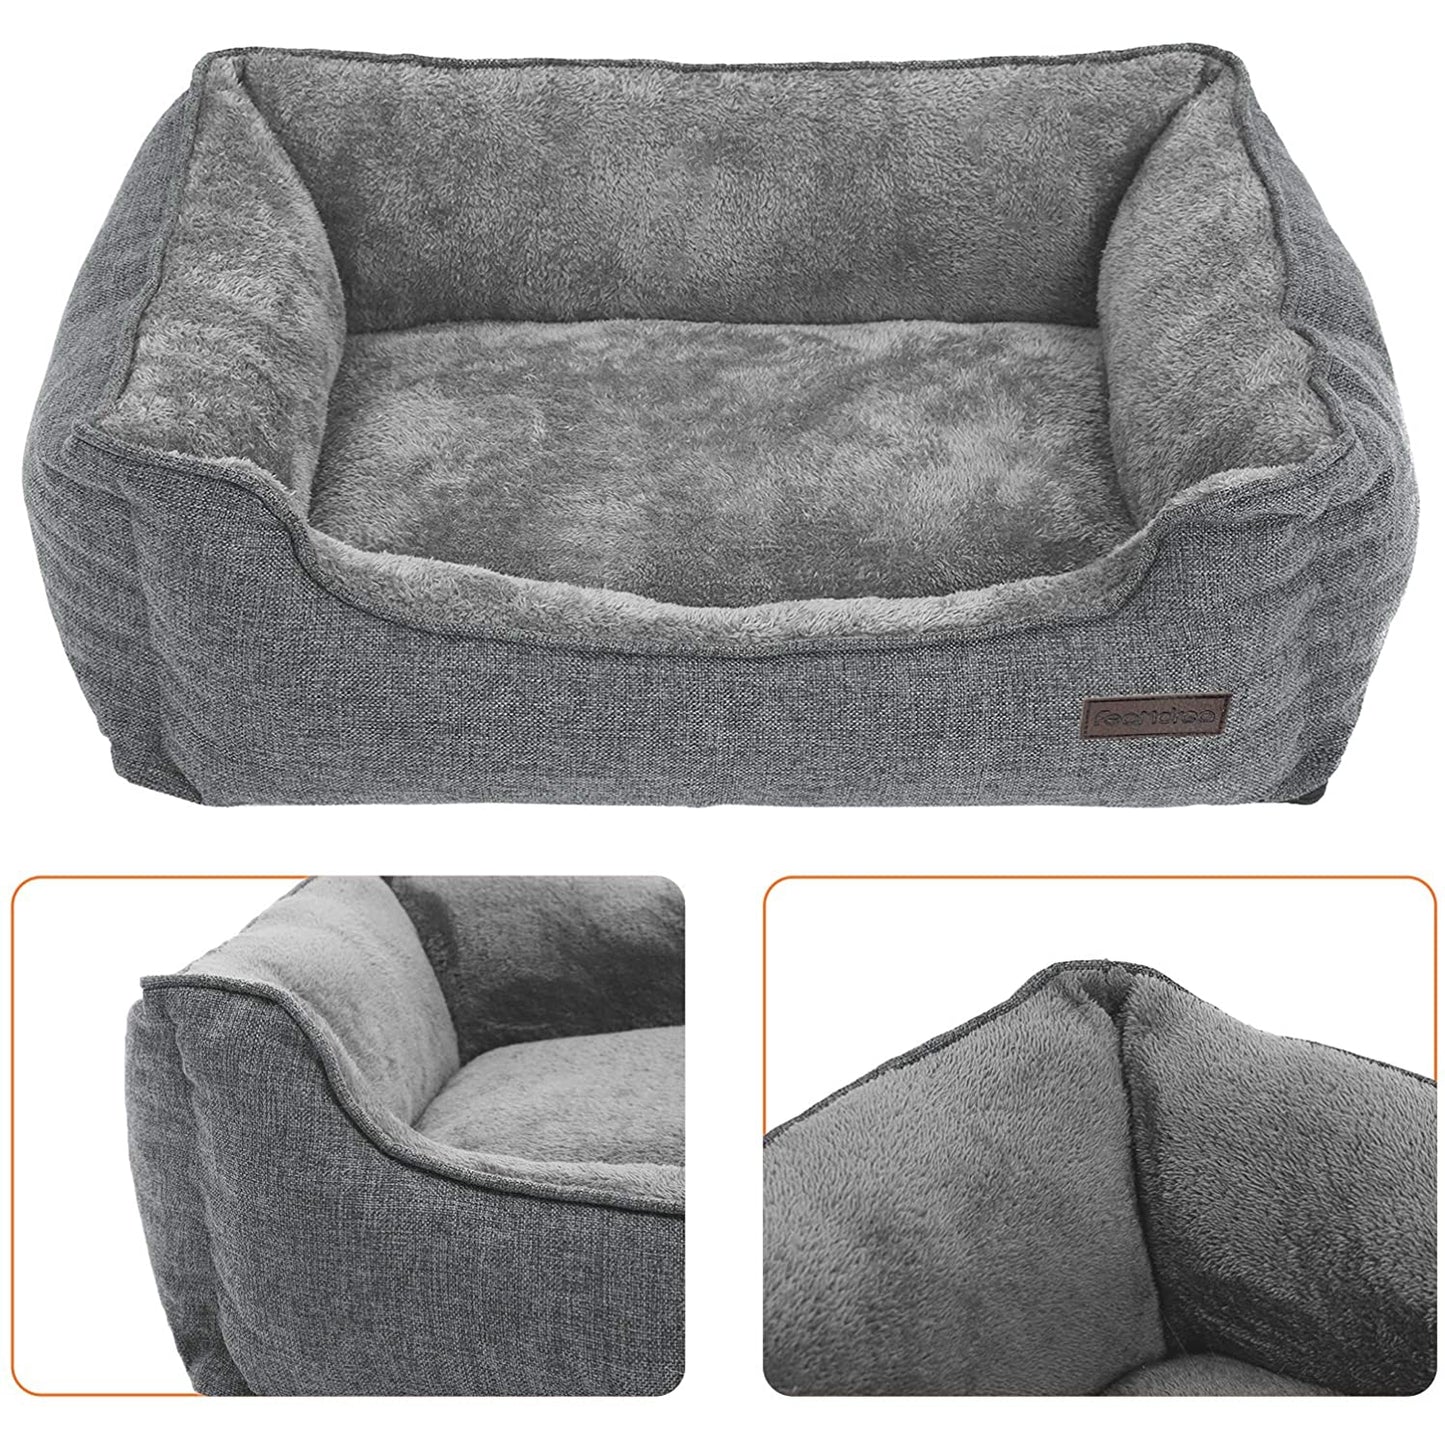 Nancy's Deluxe Dog Bed Washable - Dog Bed - Removable Cover - Dog Beds - 90 x 75 x 25 cm